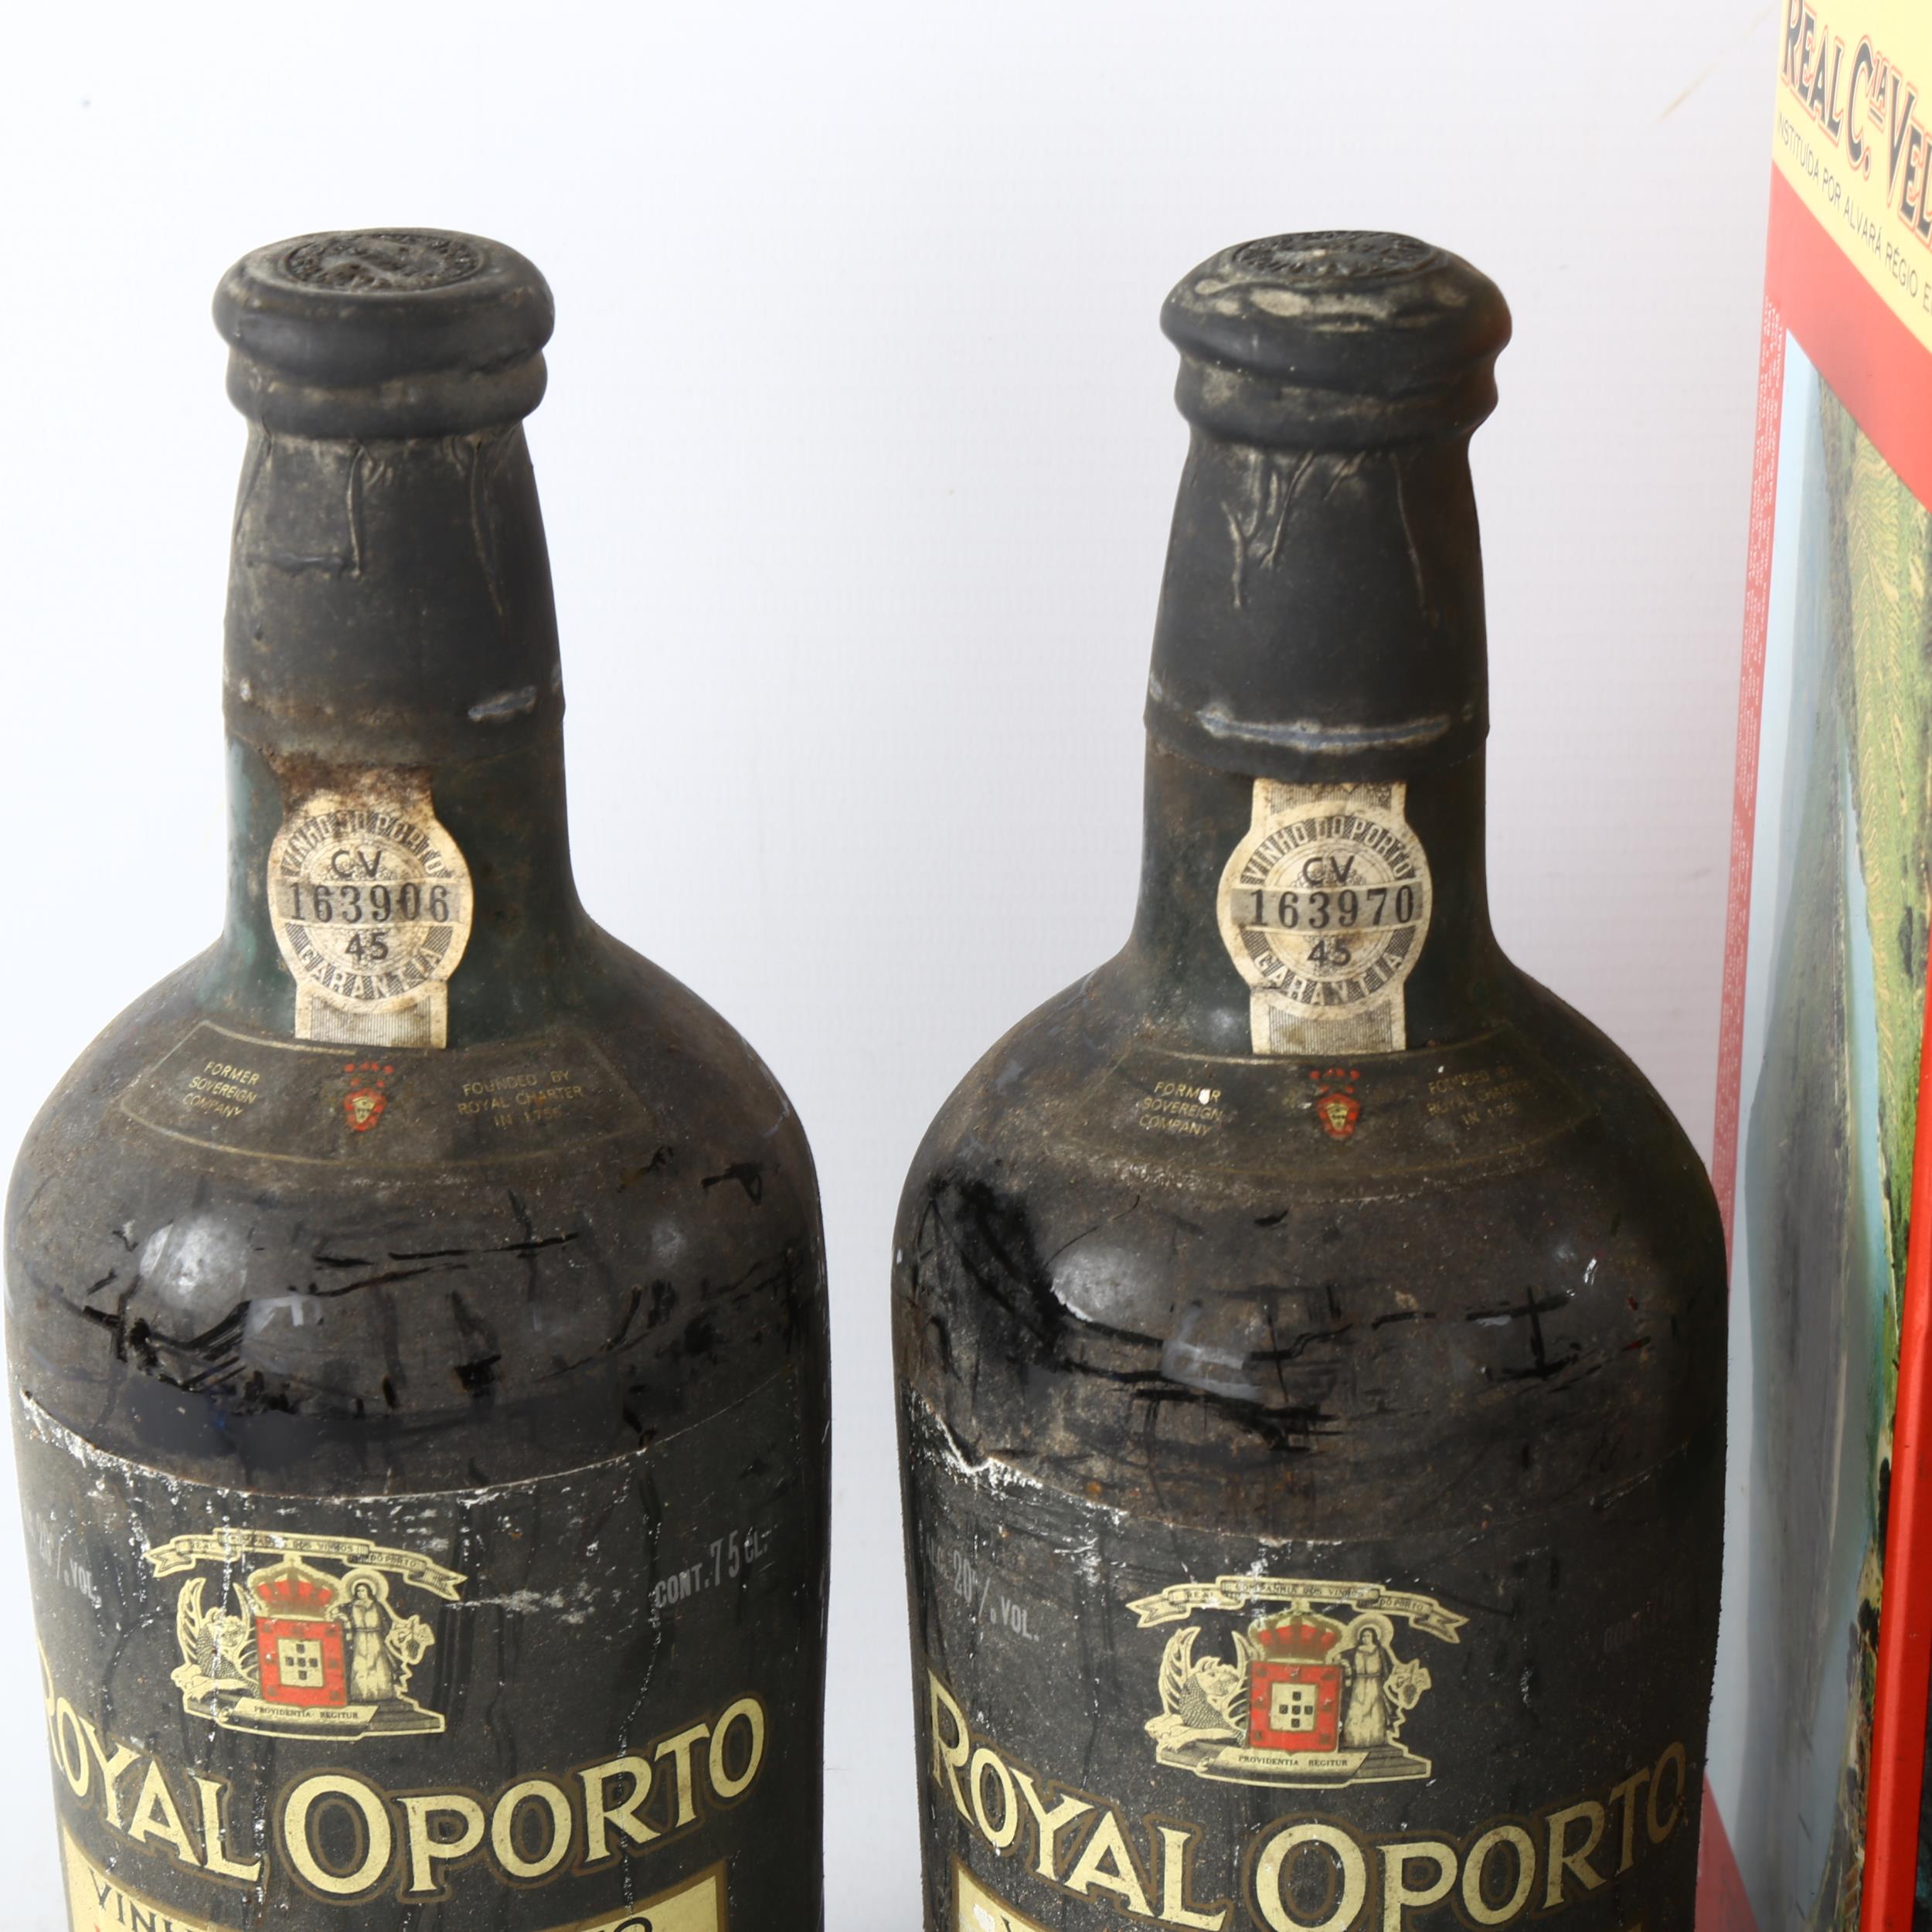 4 bottles of vintage port, 1967 Royal Oporto, 2 in original box Capsules intact, levels high - Image 2 of 3